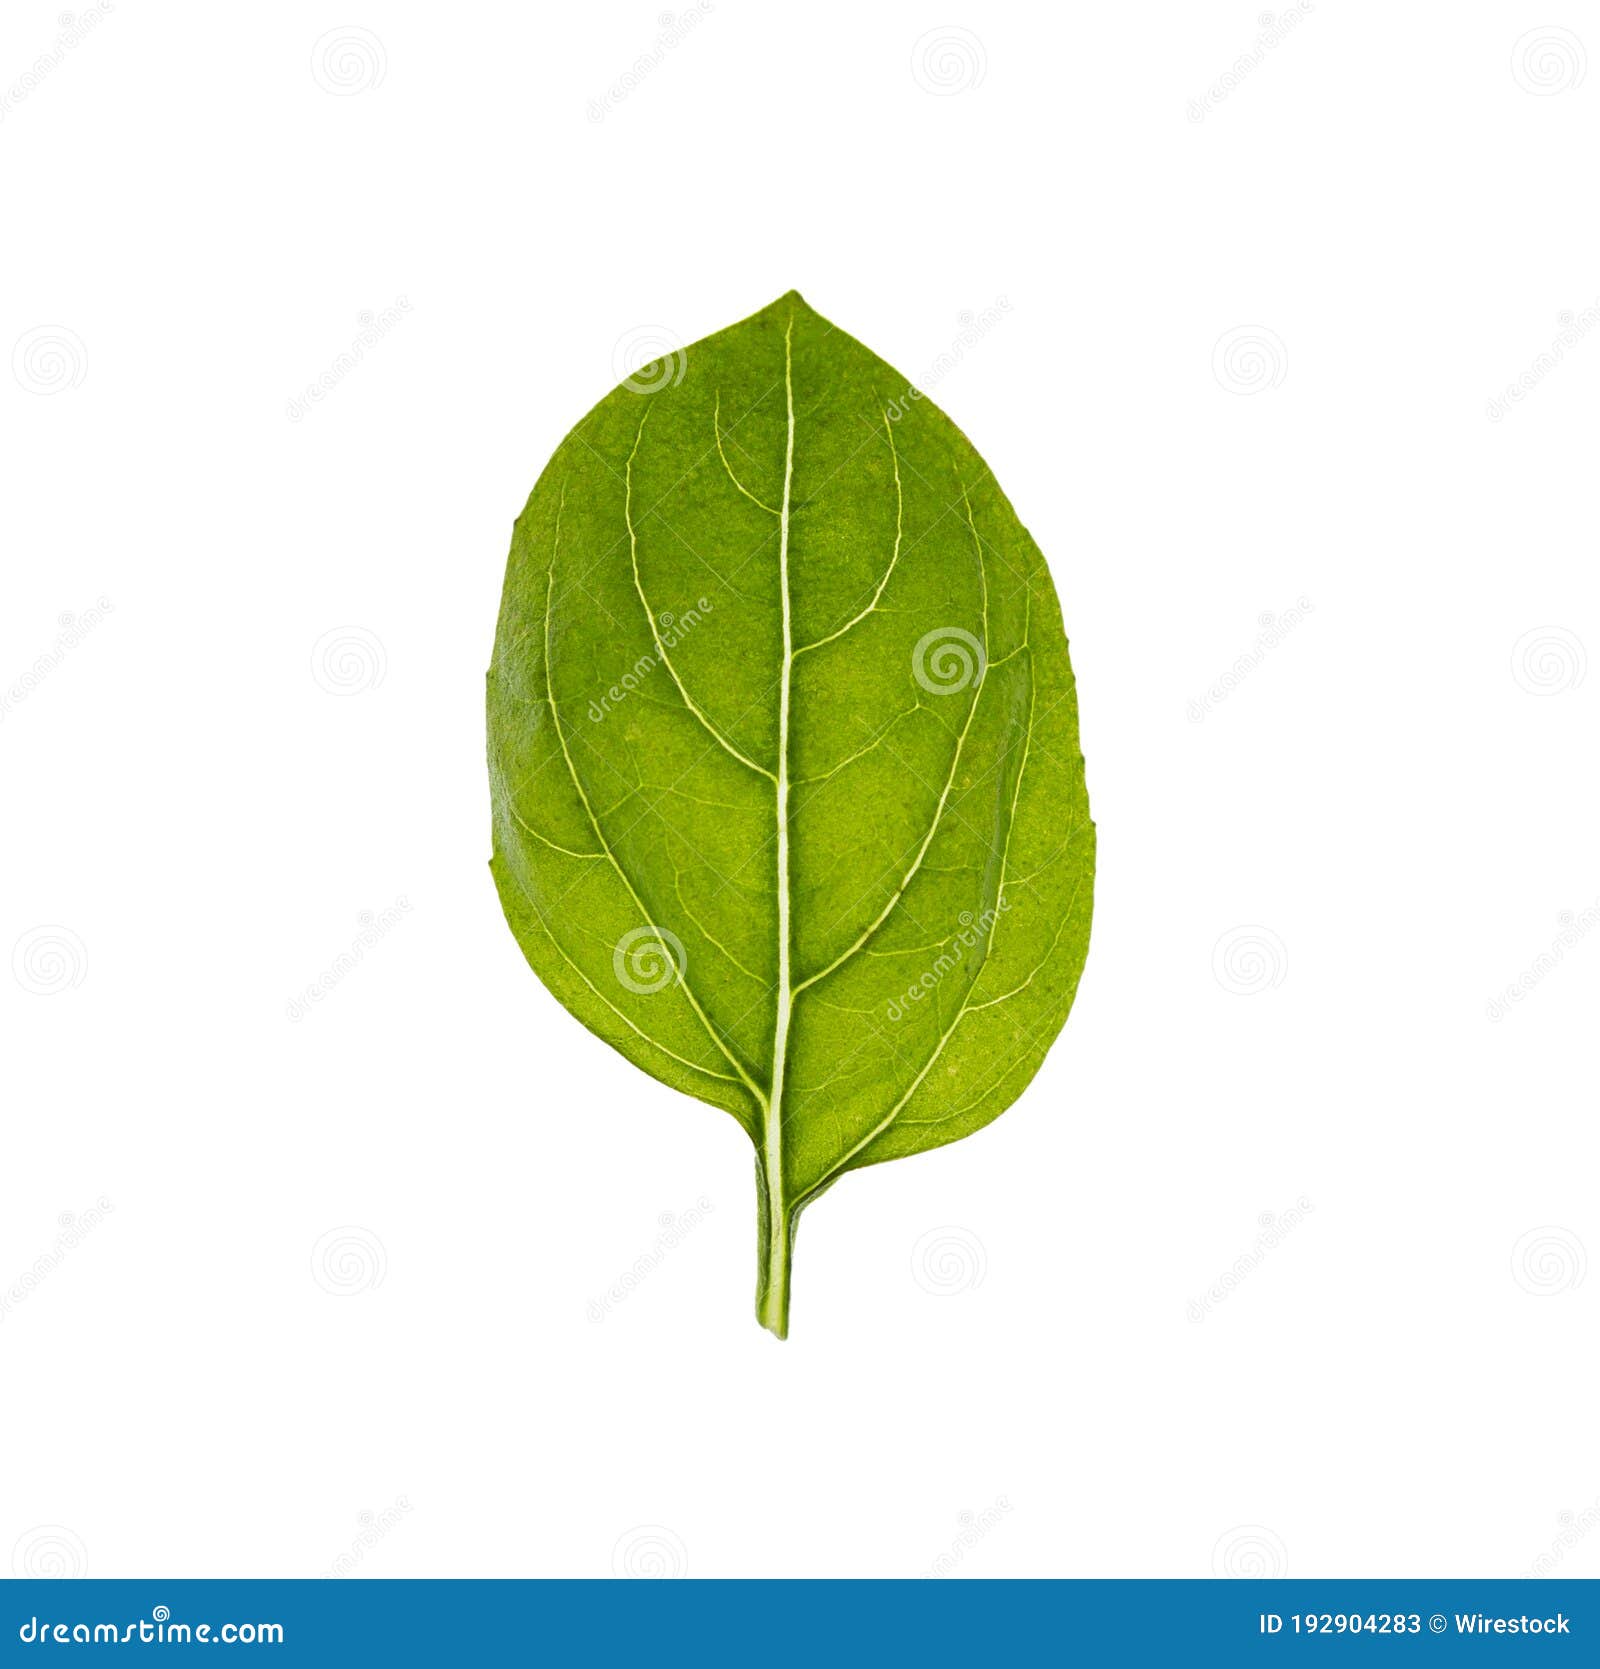 Simple Illustration of a Green Leaf Isolated on a White Background ...